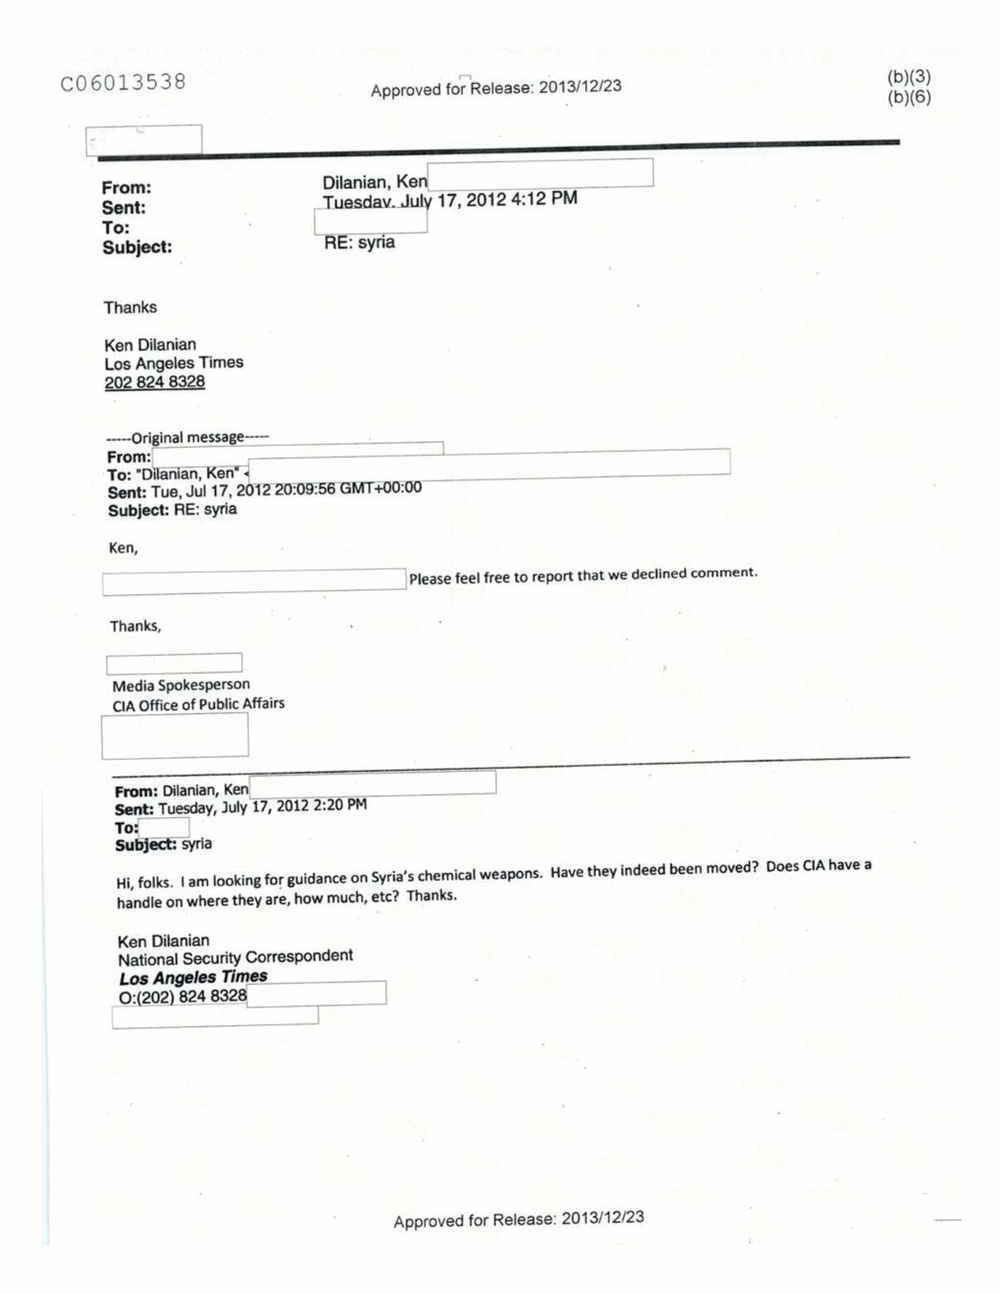 Page 391 from Email Correspondence Between Reporters and CIA Flacks